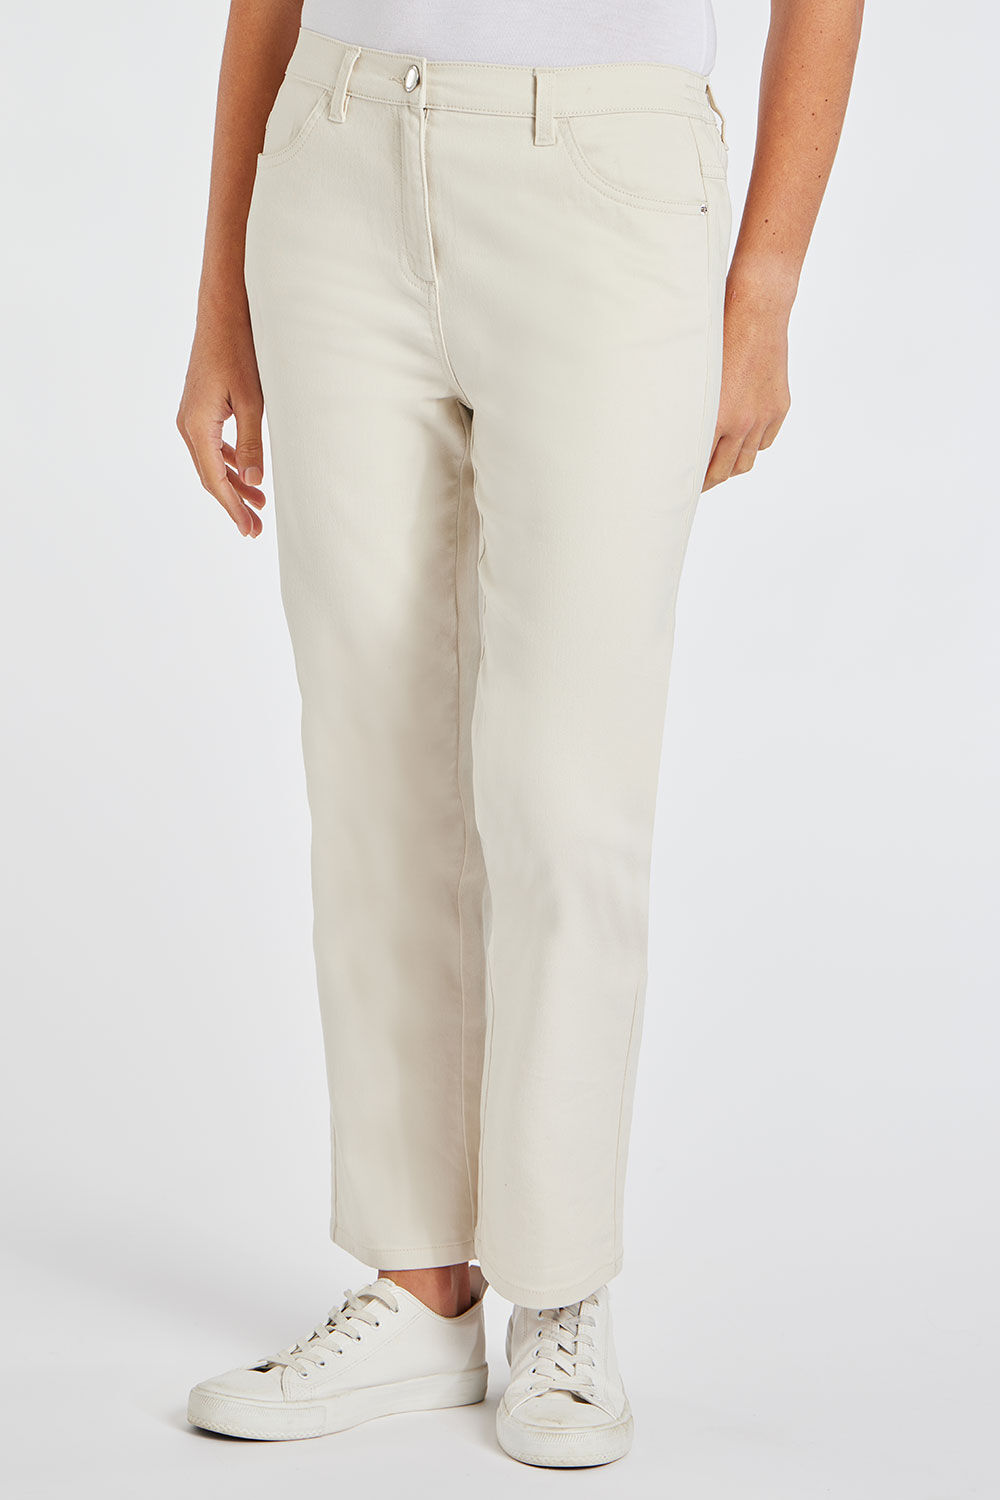 Bonmarche Ivory The Sara Coloured Straight Leg Jeans, Size: 10